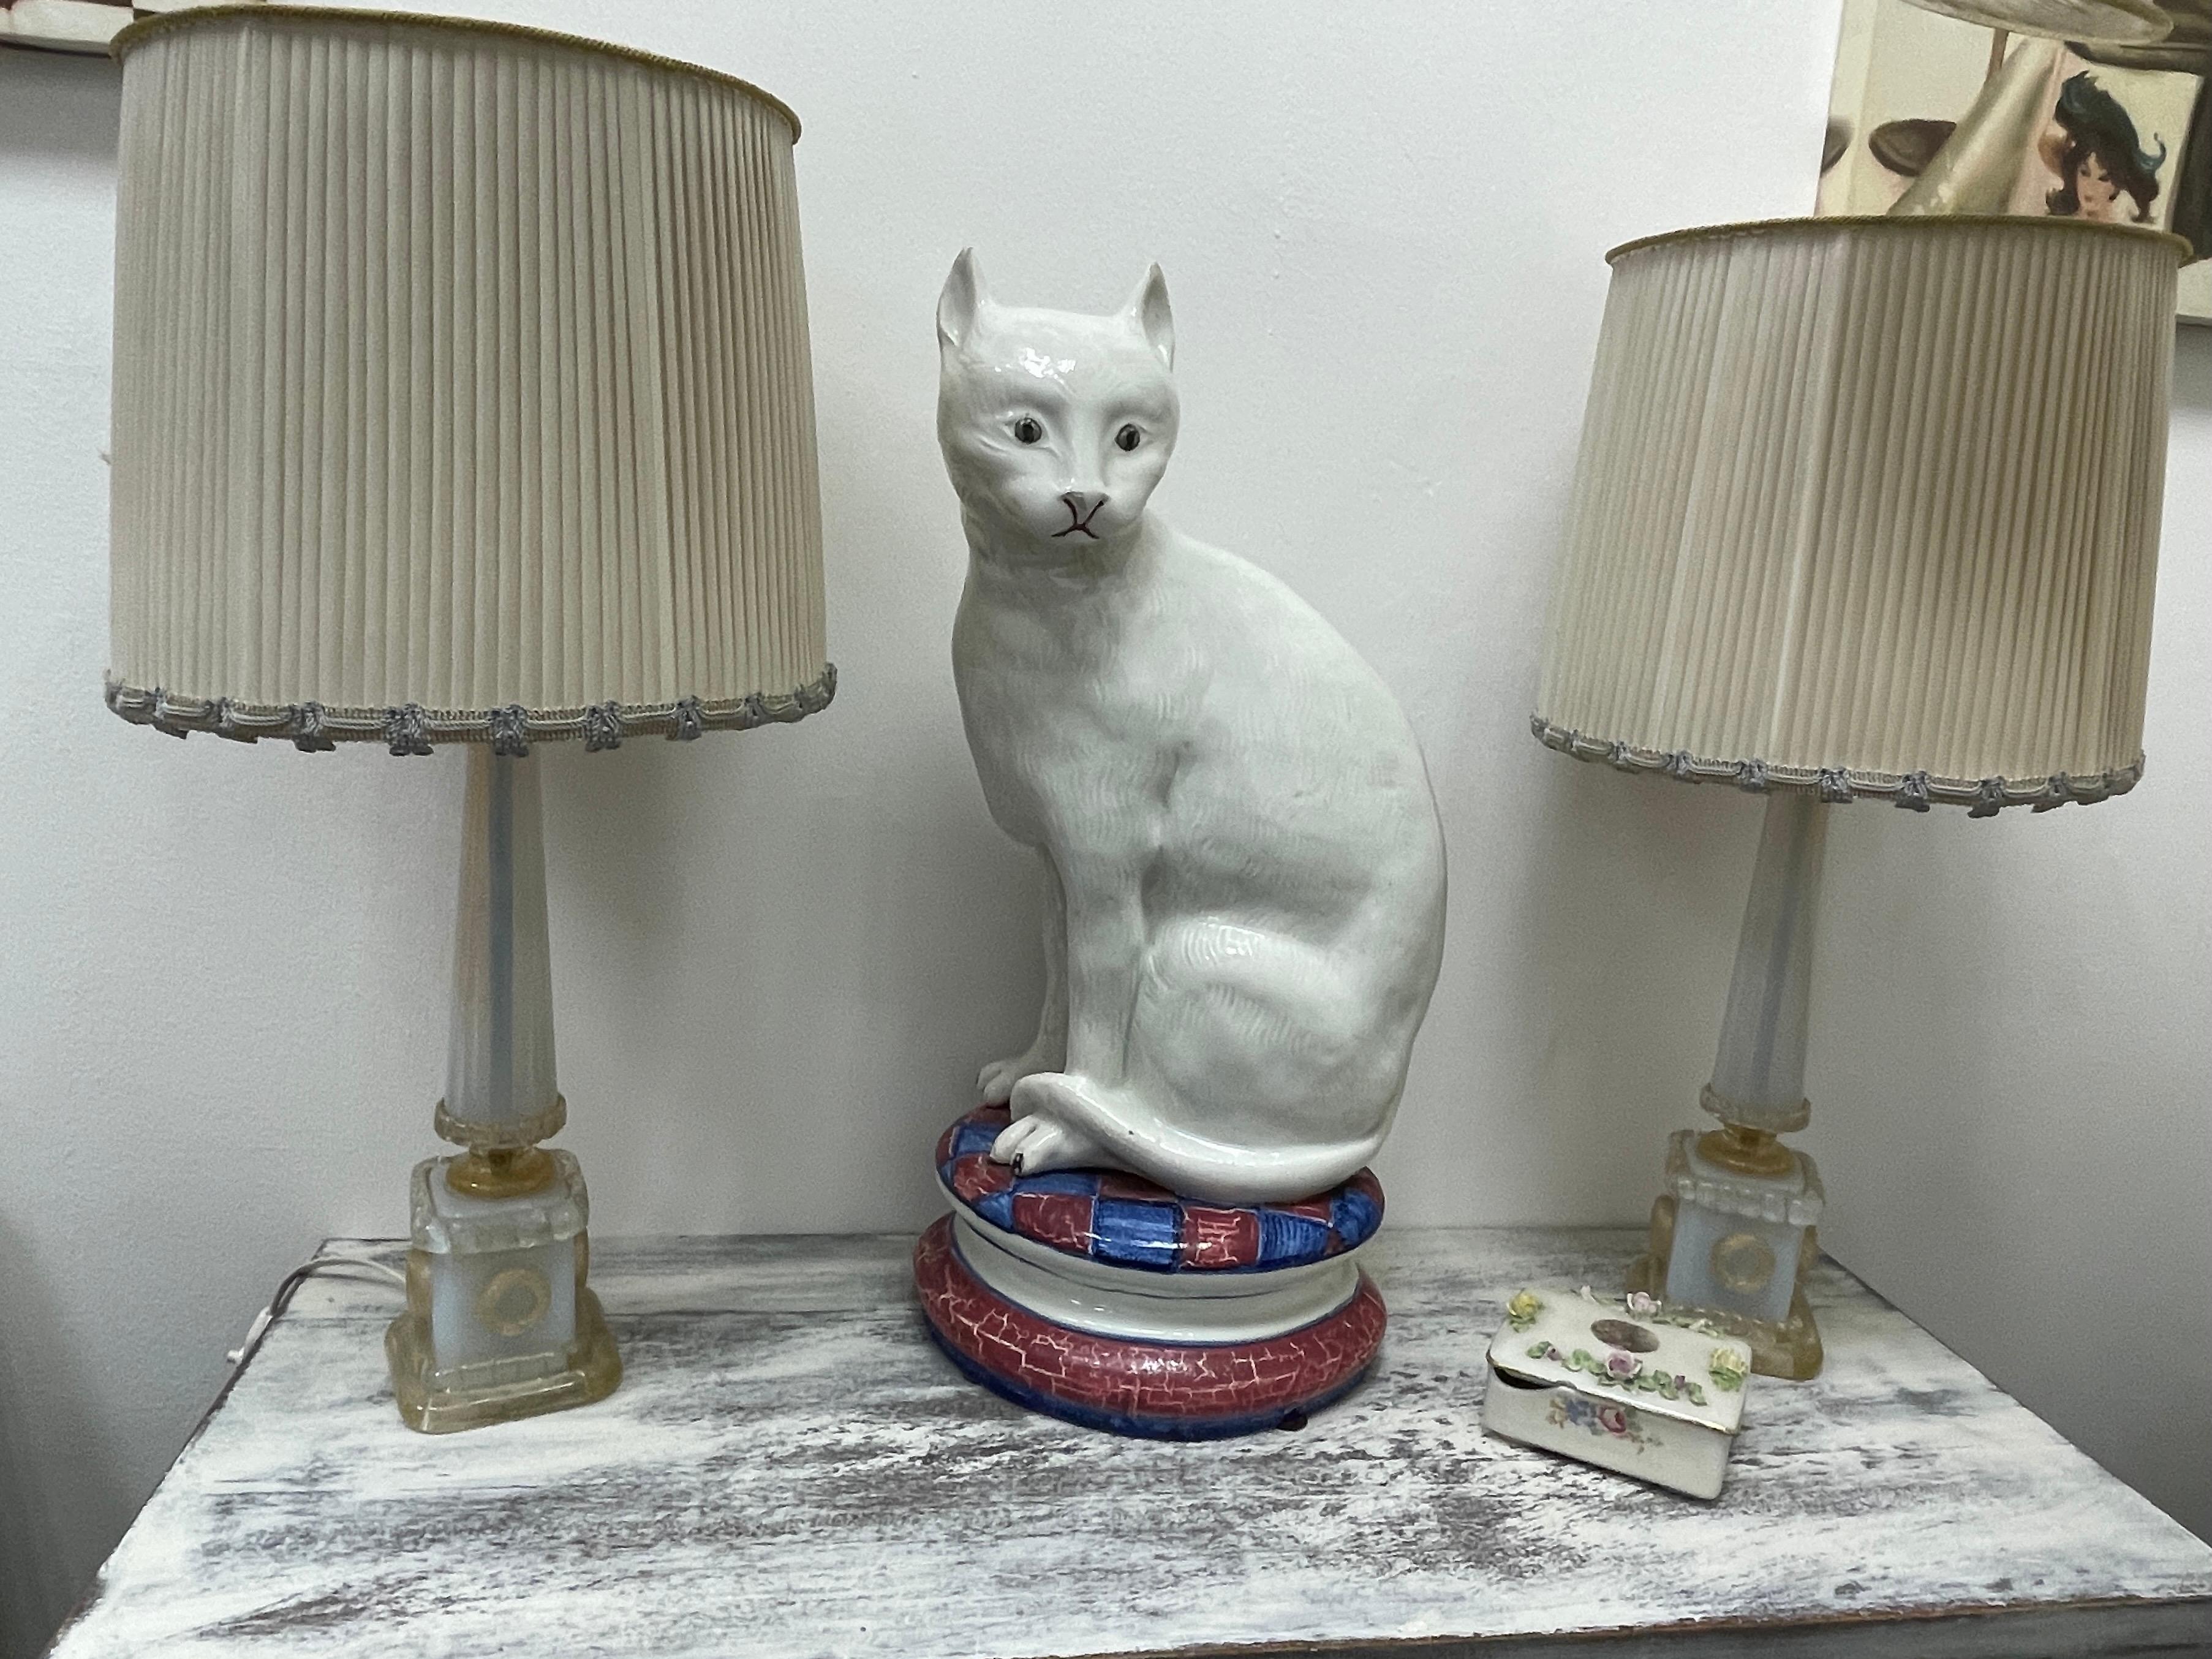 Classic Hollywood Regency style 1950s Italian Cat Majolica statue figurine. Nice addition to your room or entry hall. Made of majolica ceramic, hand painted. The ear and nose with some enamel loose, but this does not affect the expression and the